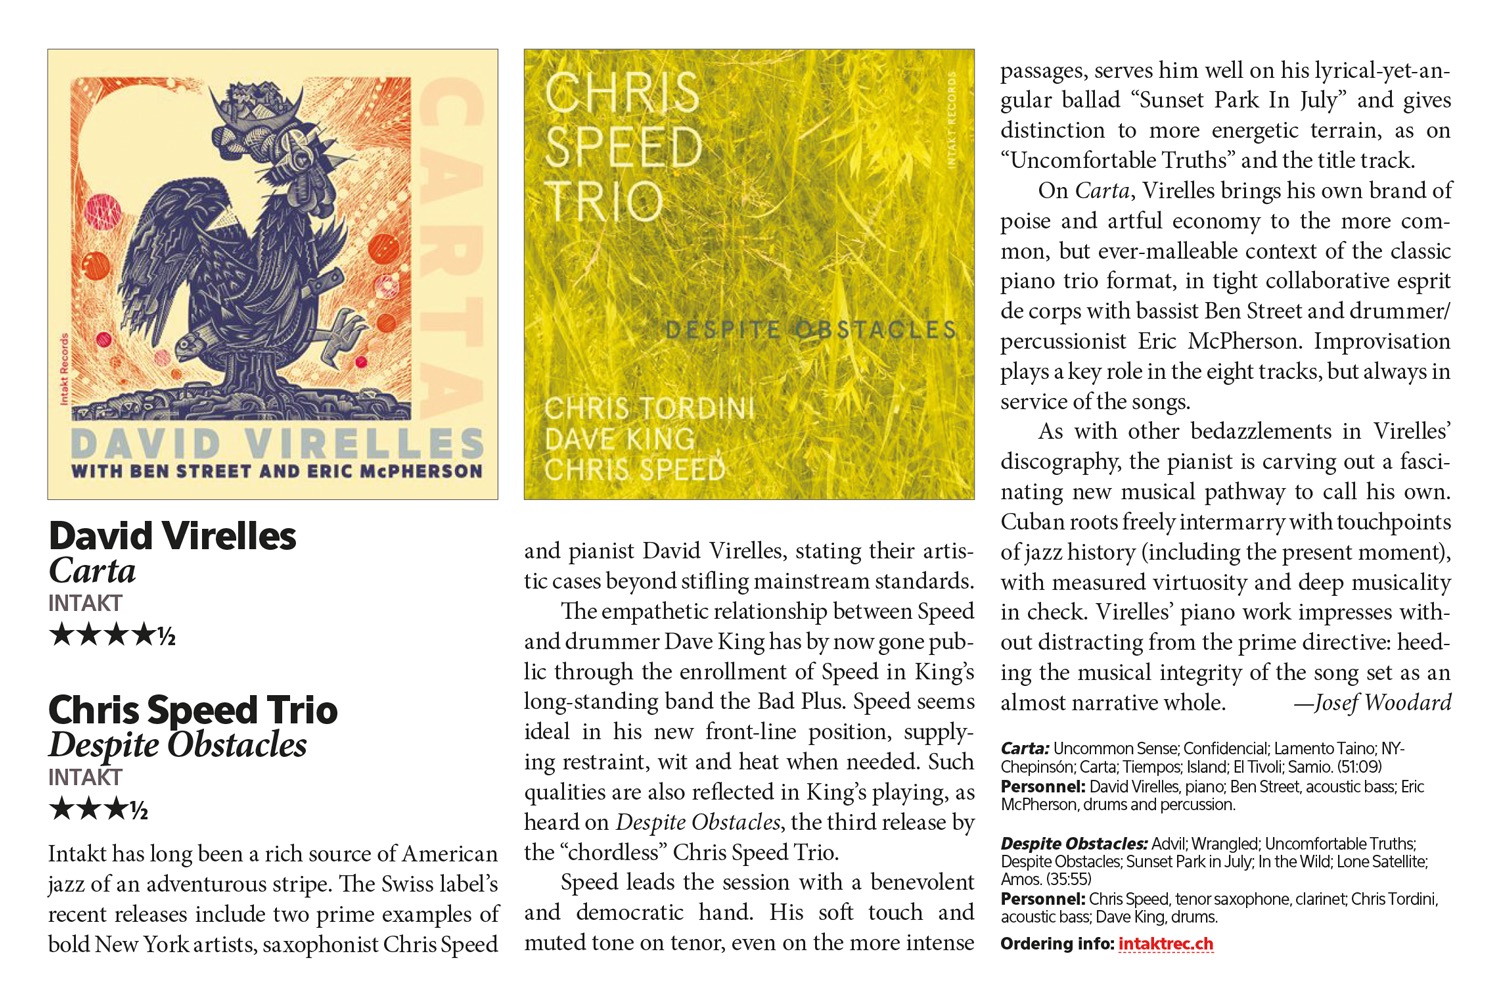 Intakt has long been a rich source of American
		jazz of an adventurous stripe. The Swiss label's
		recent releases include two prime examples of
		bold New York artists, saxophonist Chris Speed
		and pianist David Virelles, stating their artis-
		tic cases beyond stifling mainstream standards.